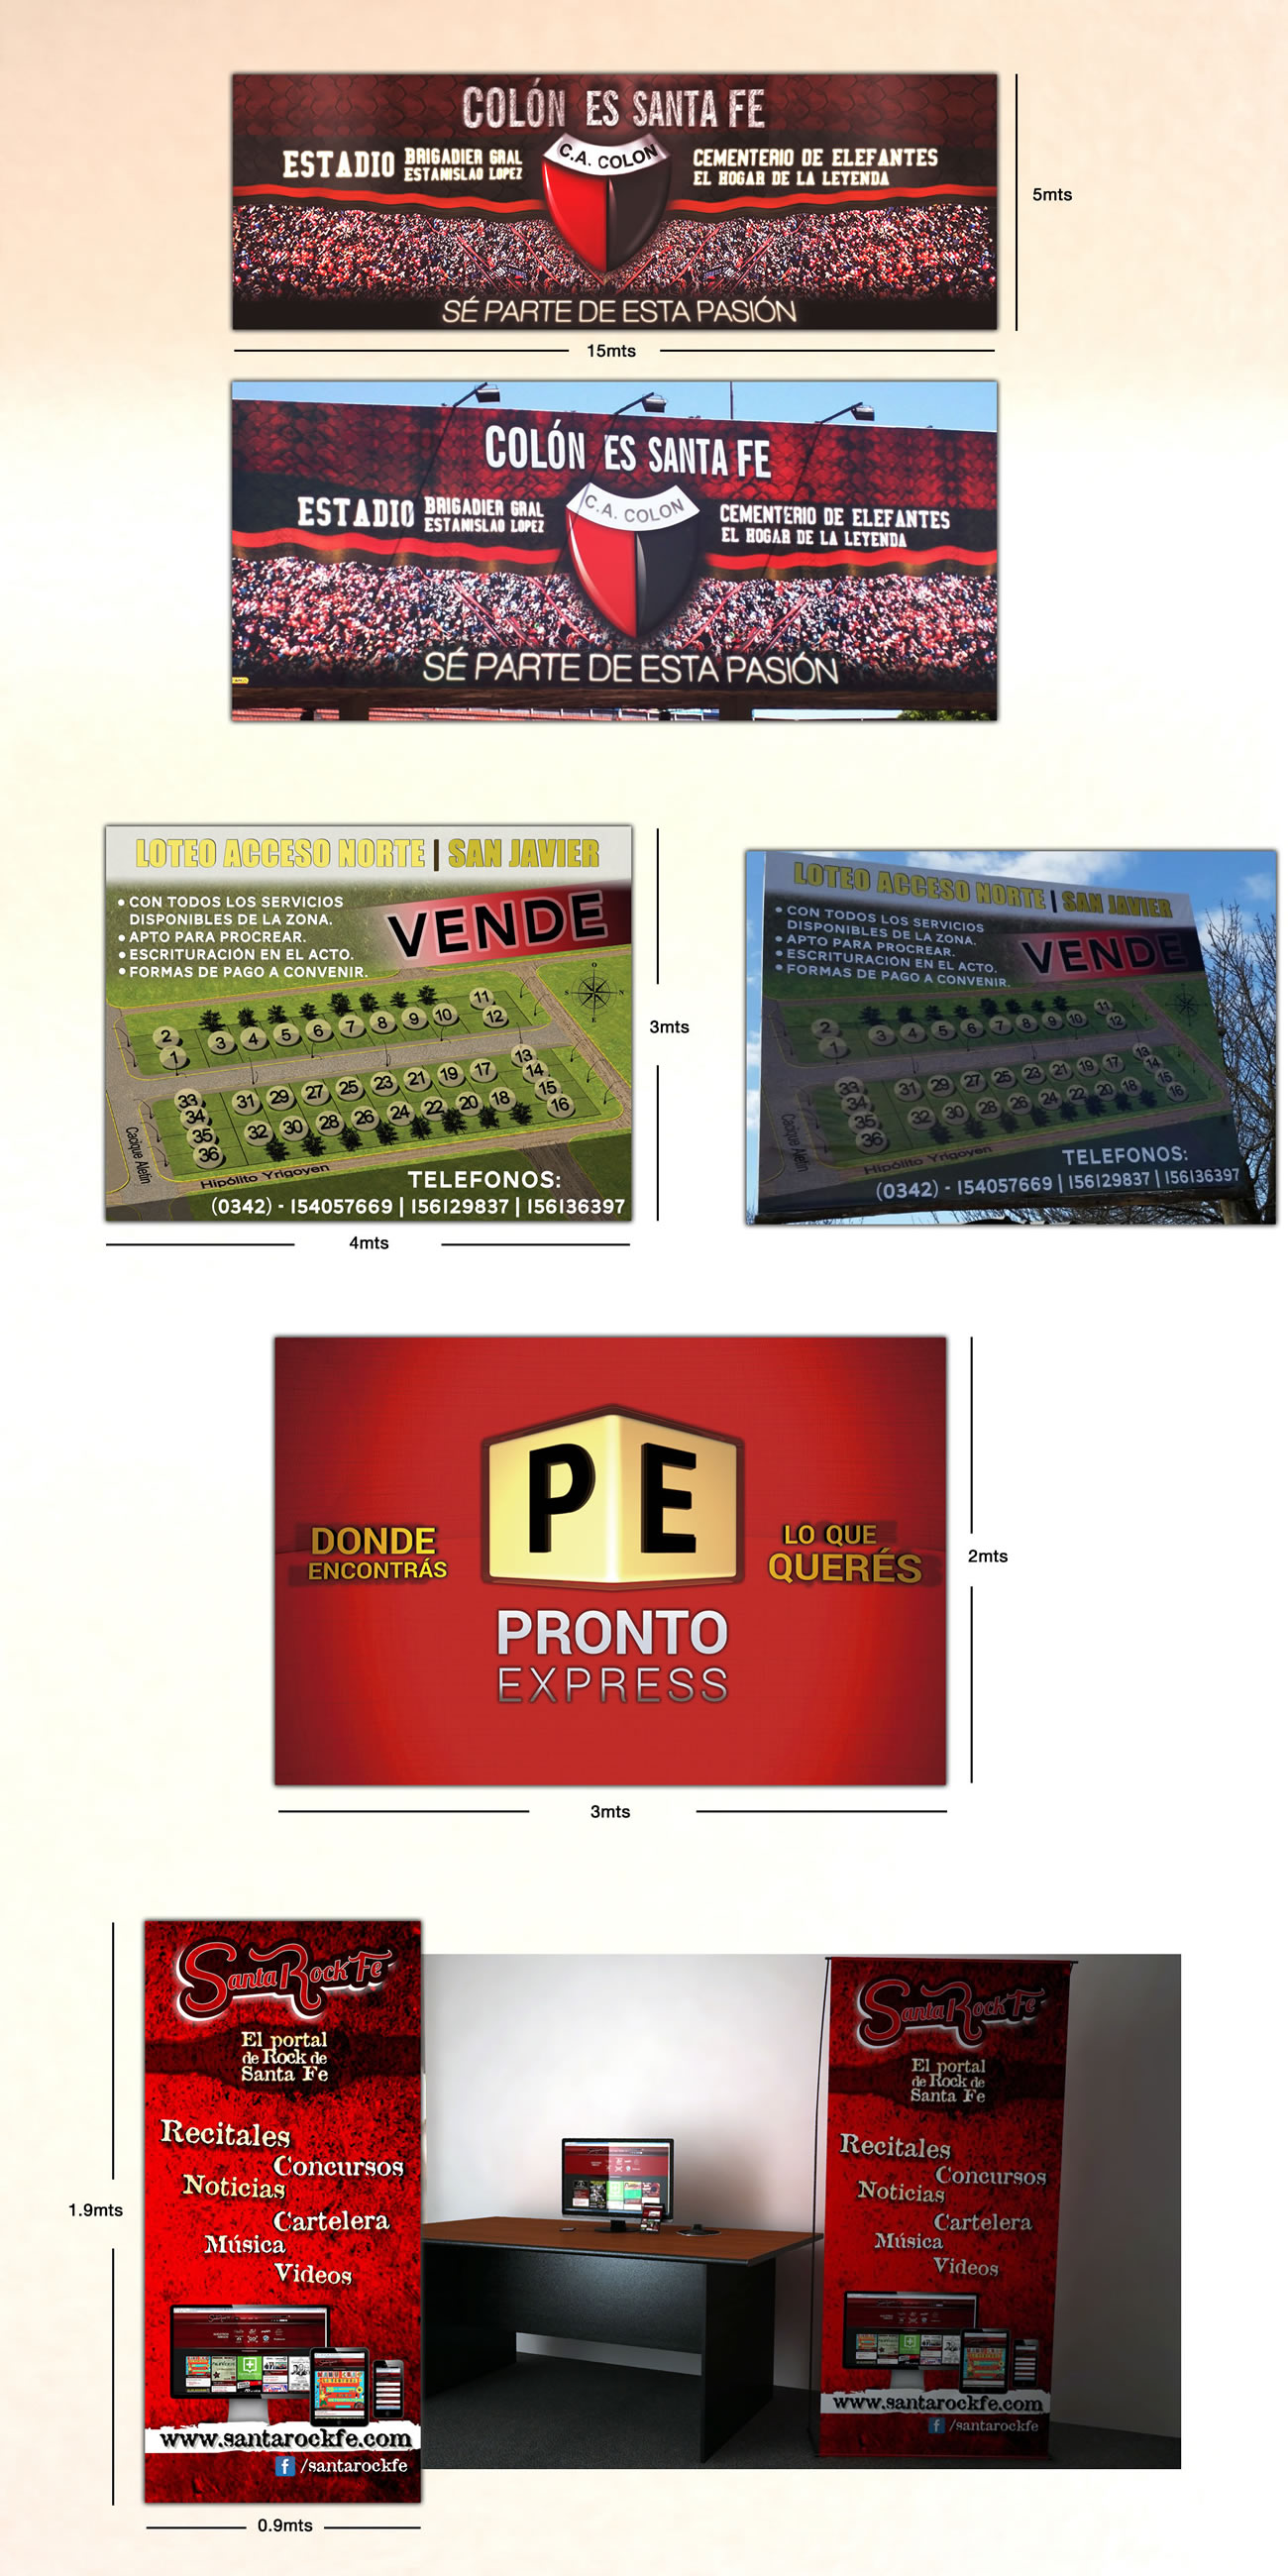 Image of Posters & Giant Posters, Banners | Design, Printed works, 3d, Banners, Giant Posters